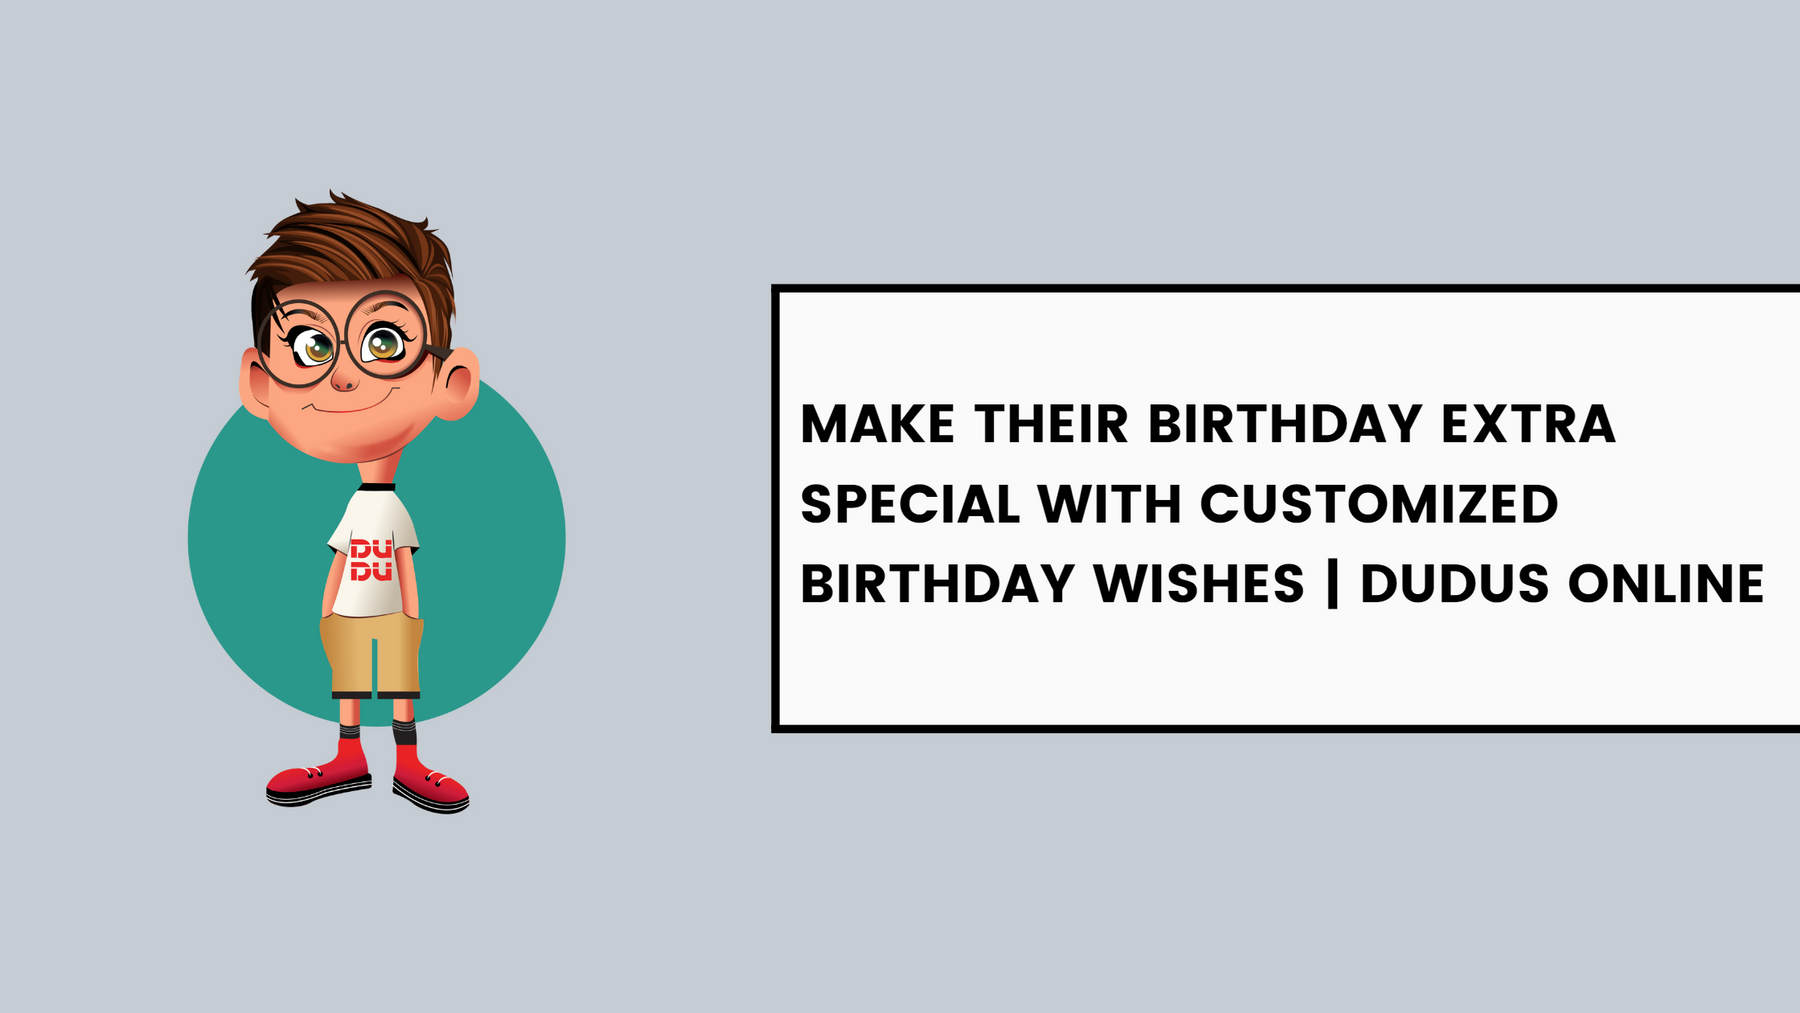 Make Their Birthday Extra Special with Customized Birthday Wishes - Dudus Online